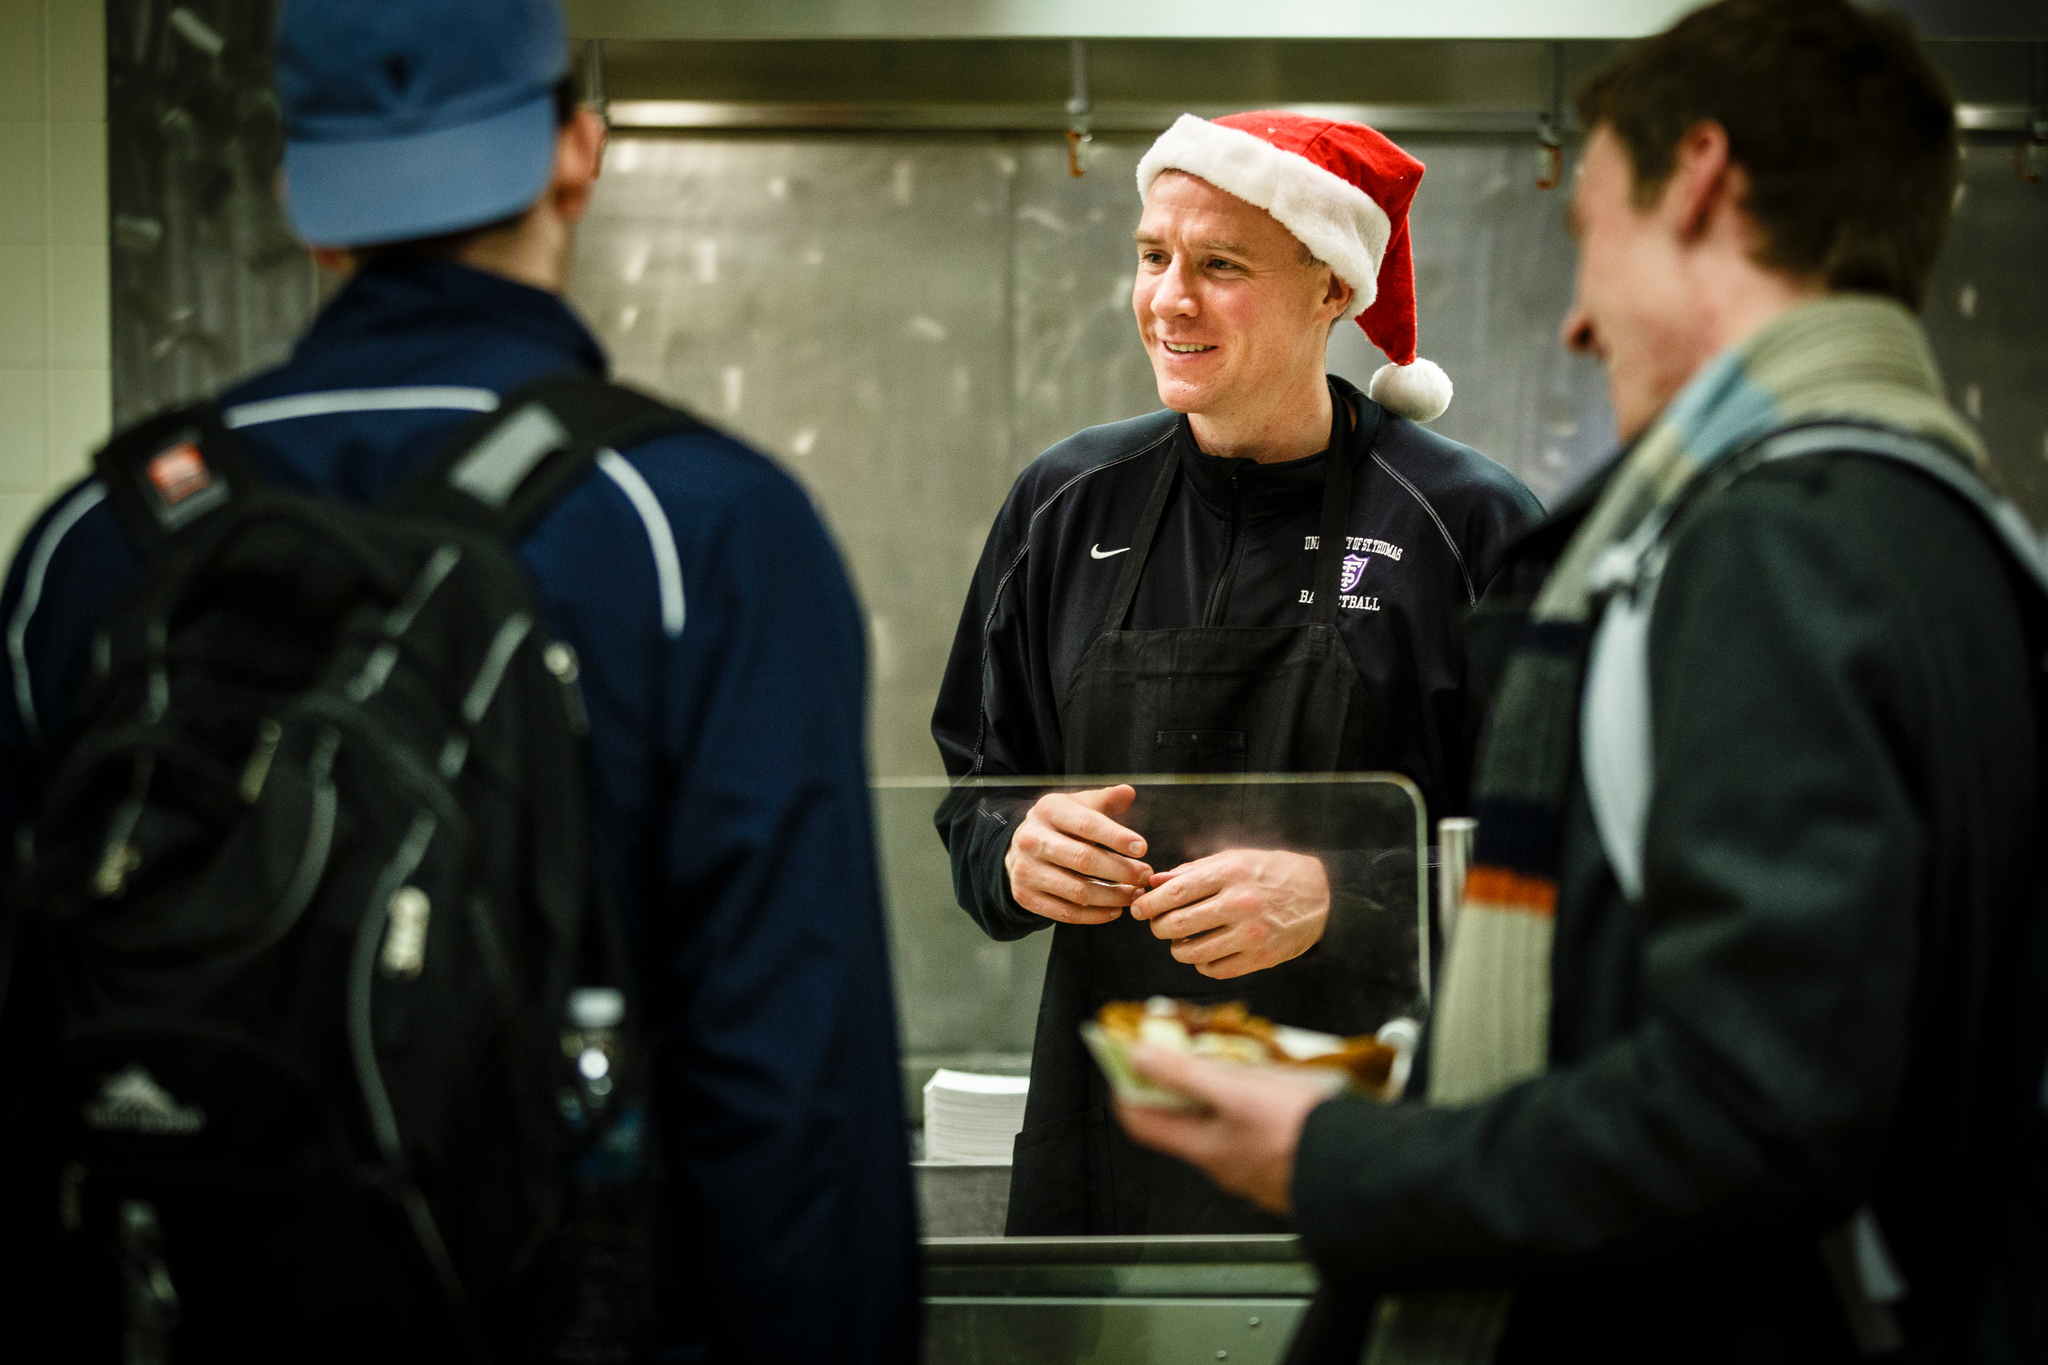 Coach John Tauer serves in T's during a past holiday season